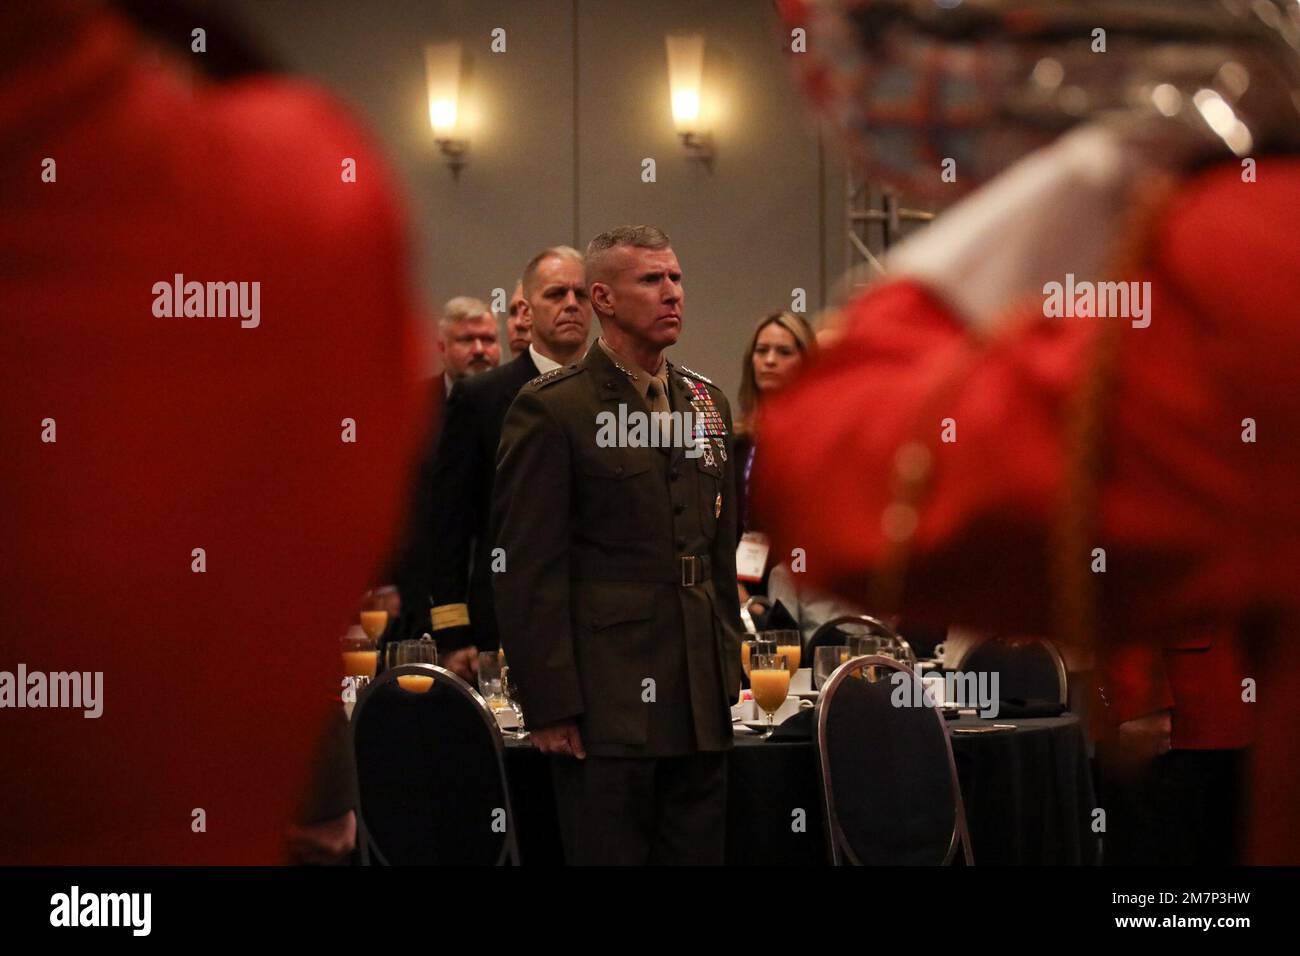 U.S. Marine Corps Gen. Eric M. Smith, the assistant commandant of the Marine Corps, stands at the position of attention during a Congressional breakfast at Modern Day Marine 2022 at the Walter E. Convention Center, Washington D.C., May 10, 2022. During the breakfast, Gen. Smith awarded the 2022 Marine Corps League Award recipients. Stock Photo